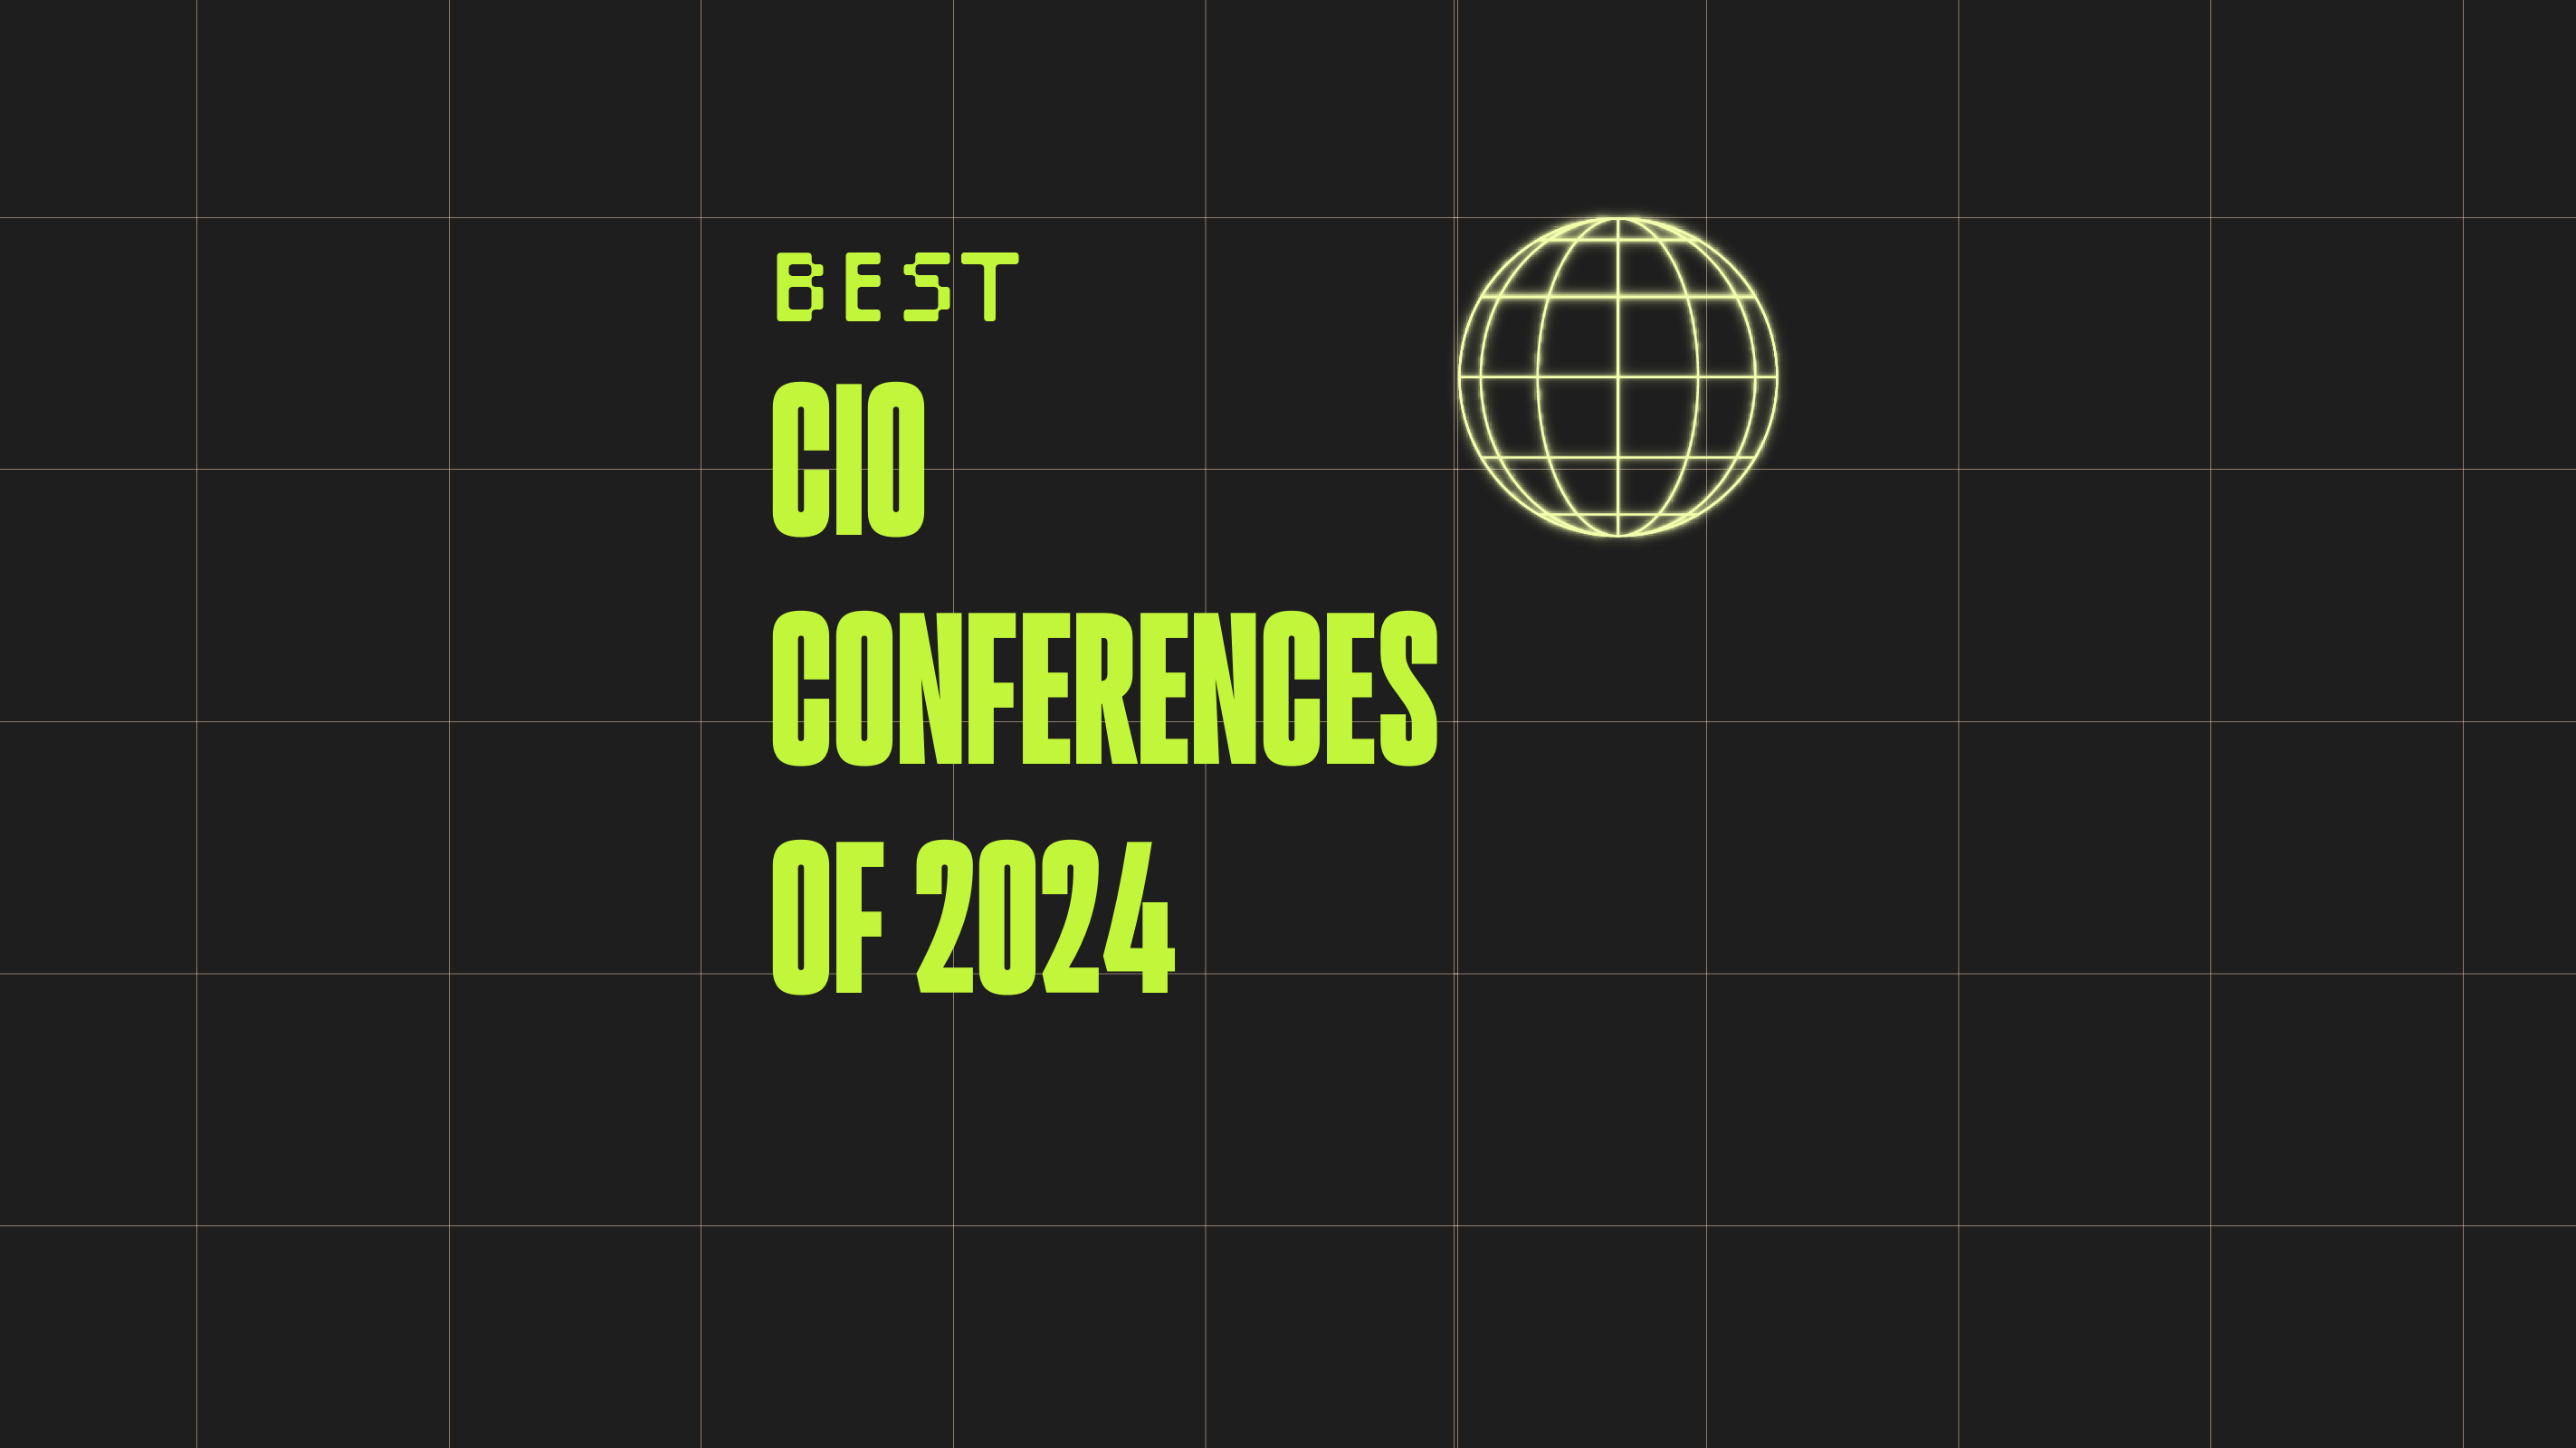 Cio conferences of 2024 best events